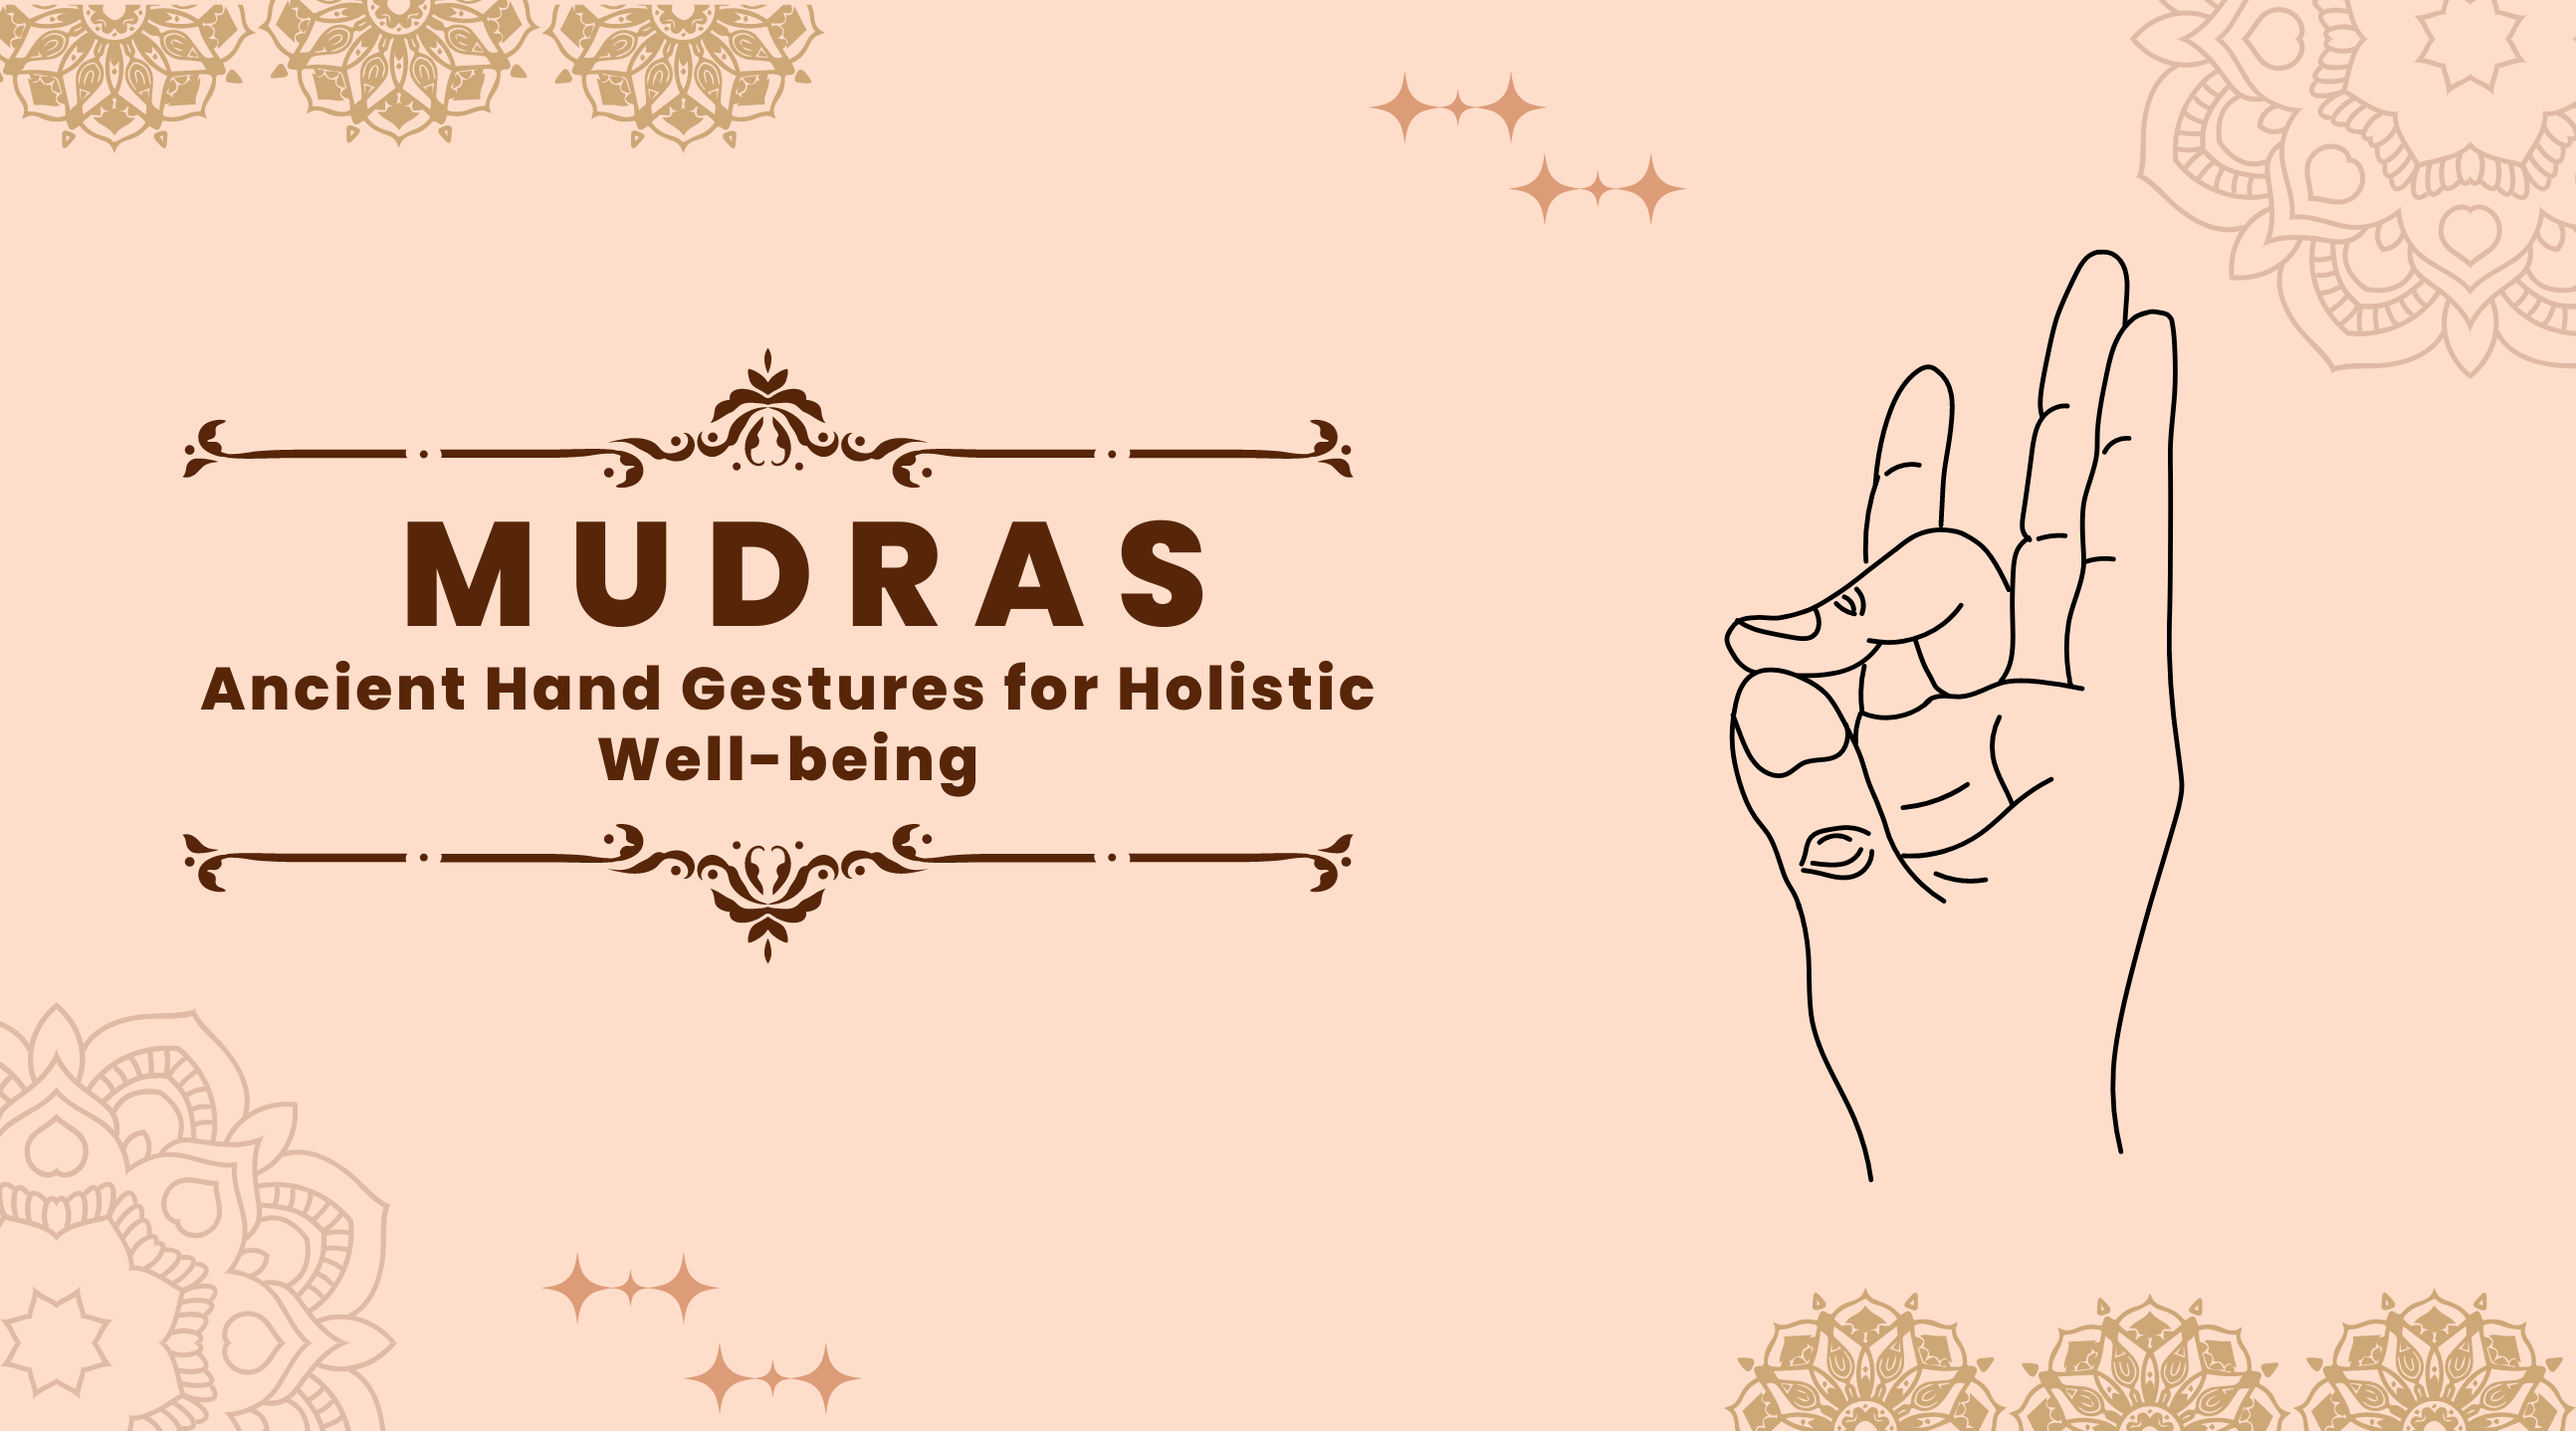 Mudras: Ancient Hand Gestures for Holistic Well-being